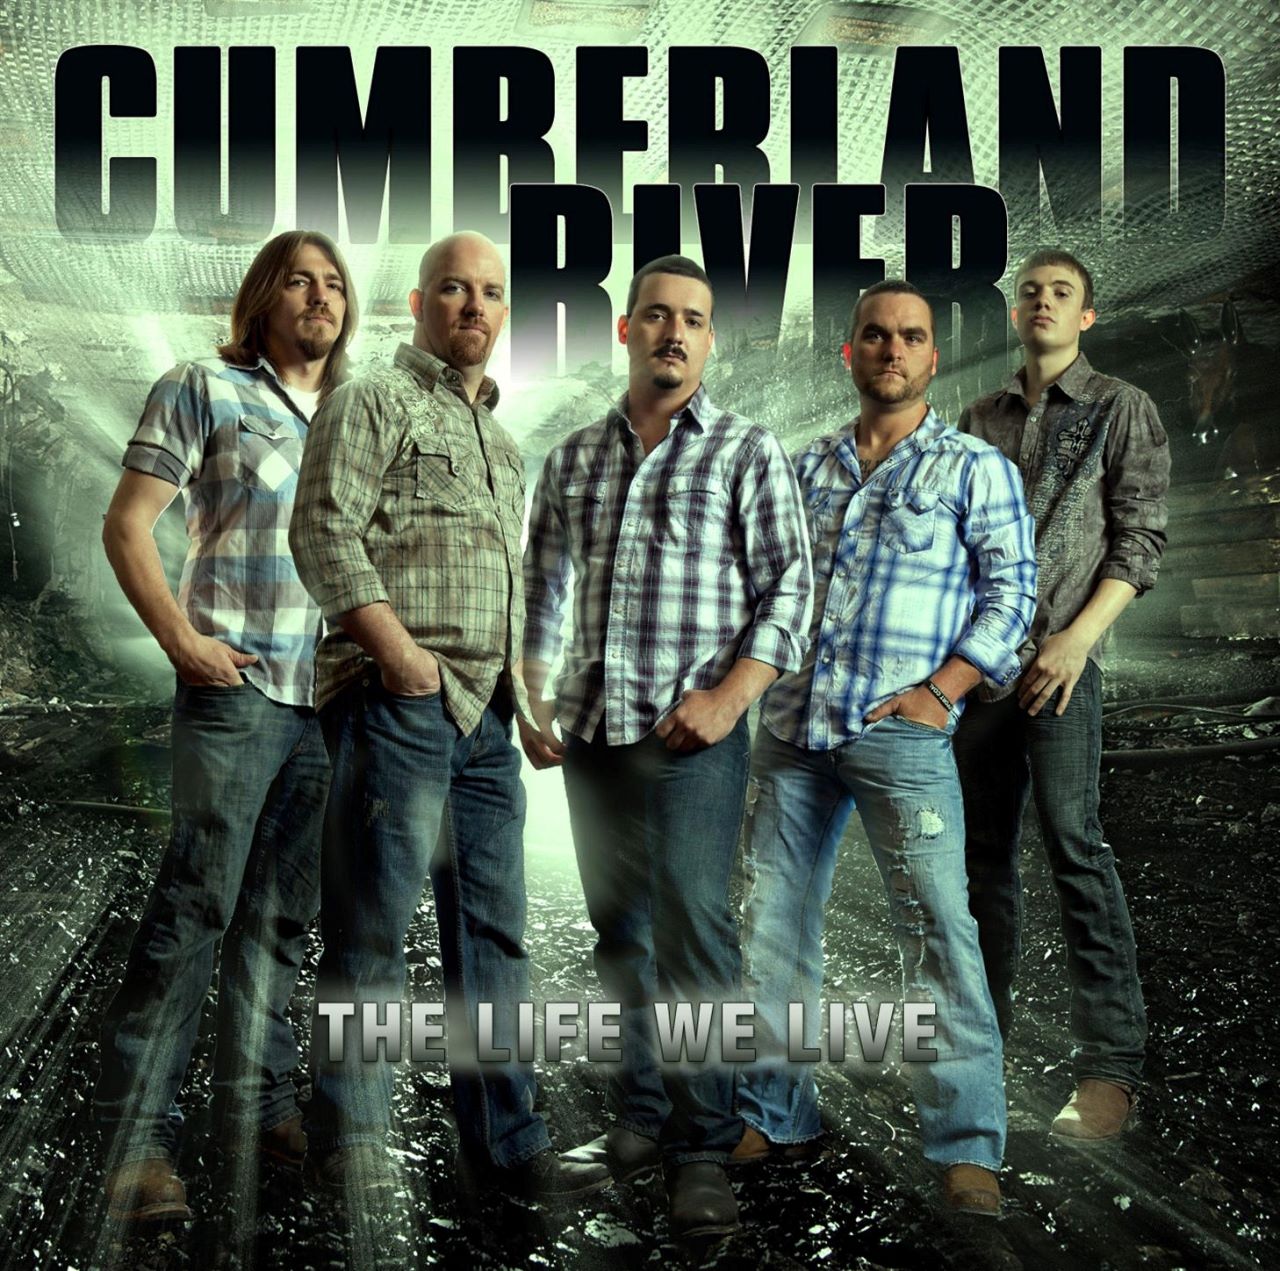 Cumberland River - The Life We Live cover album